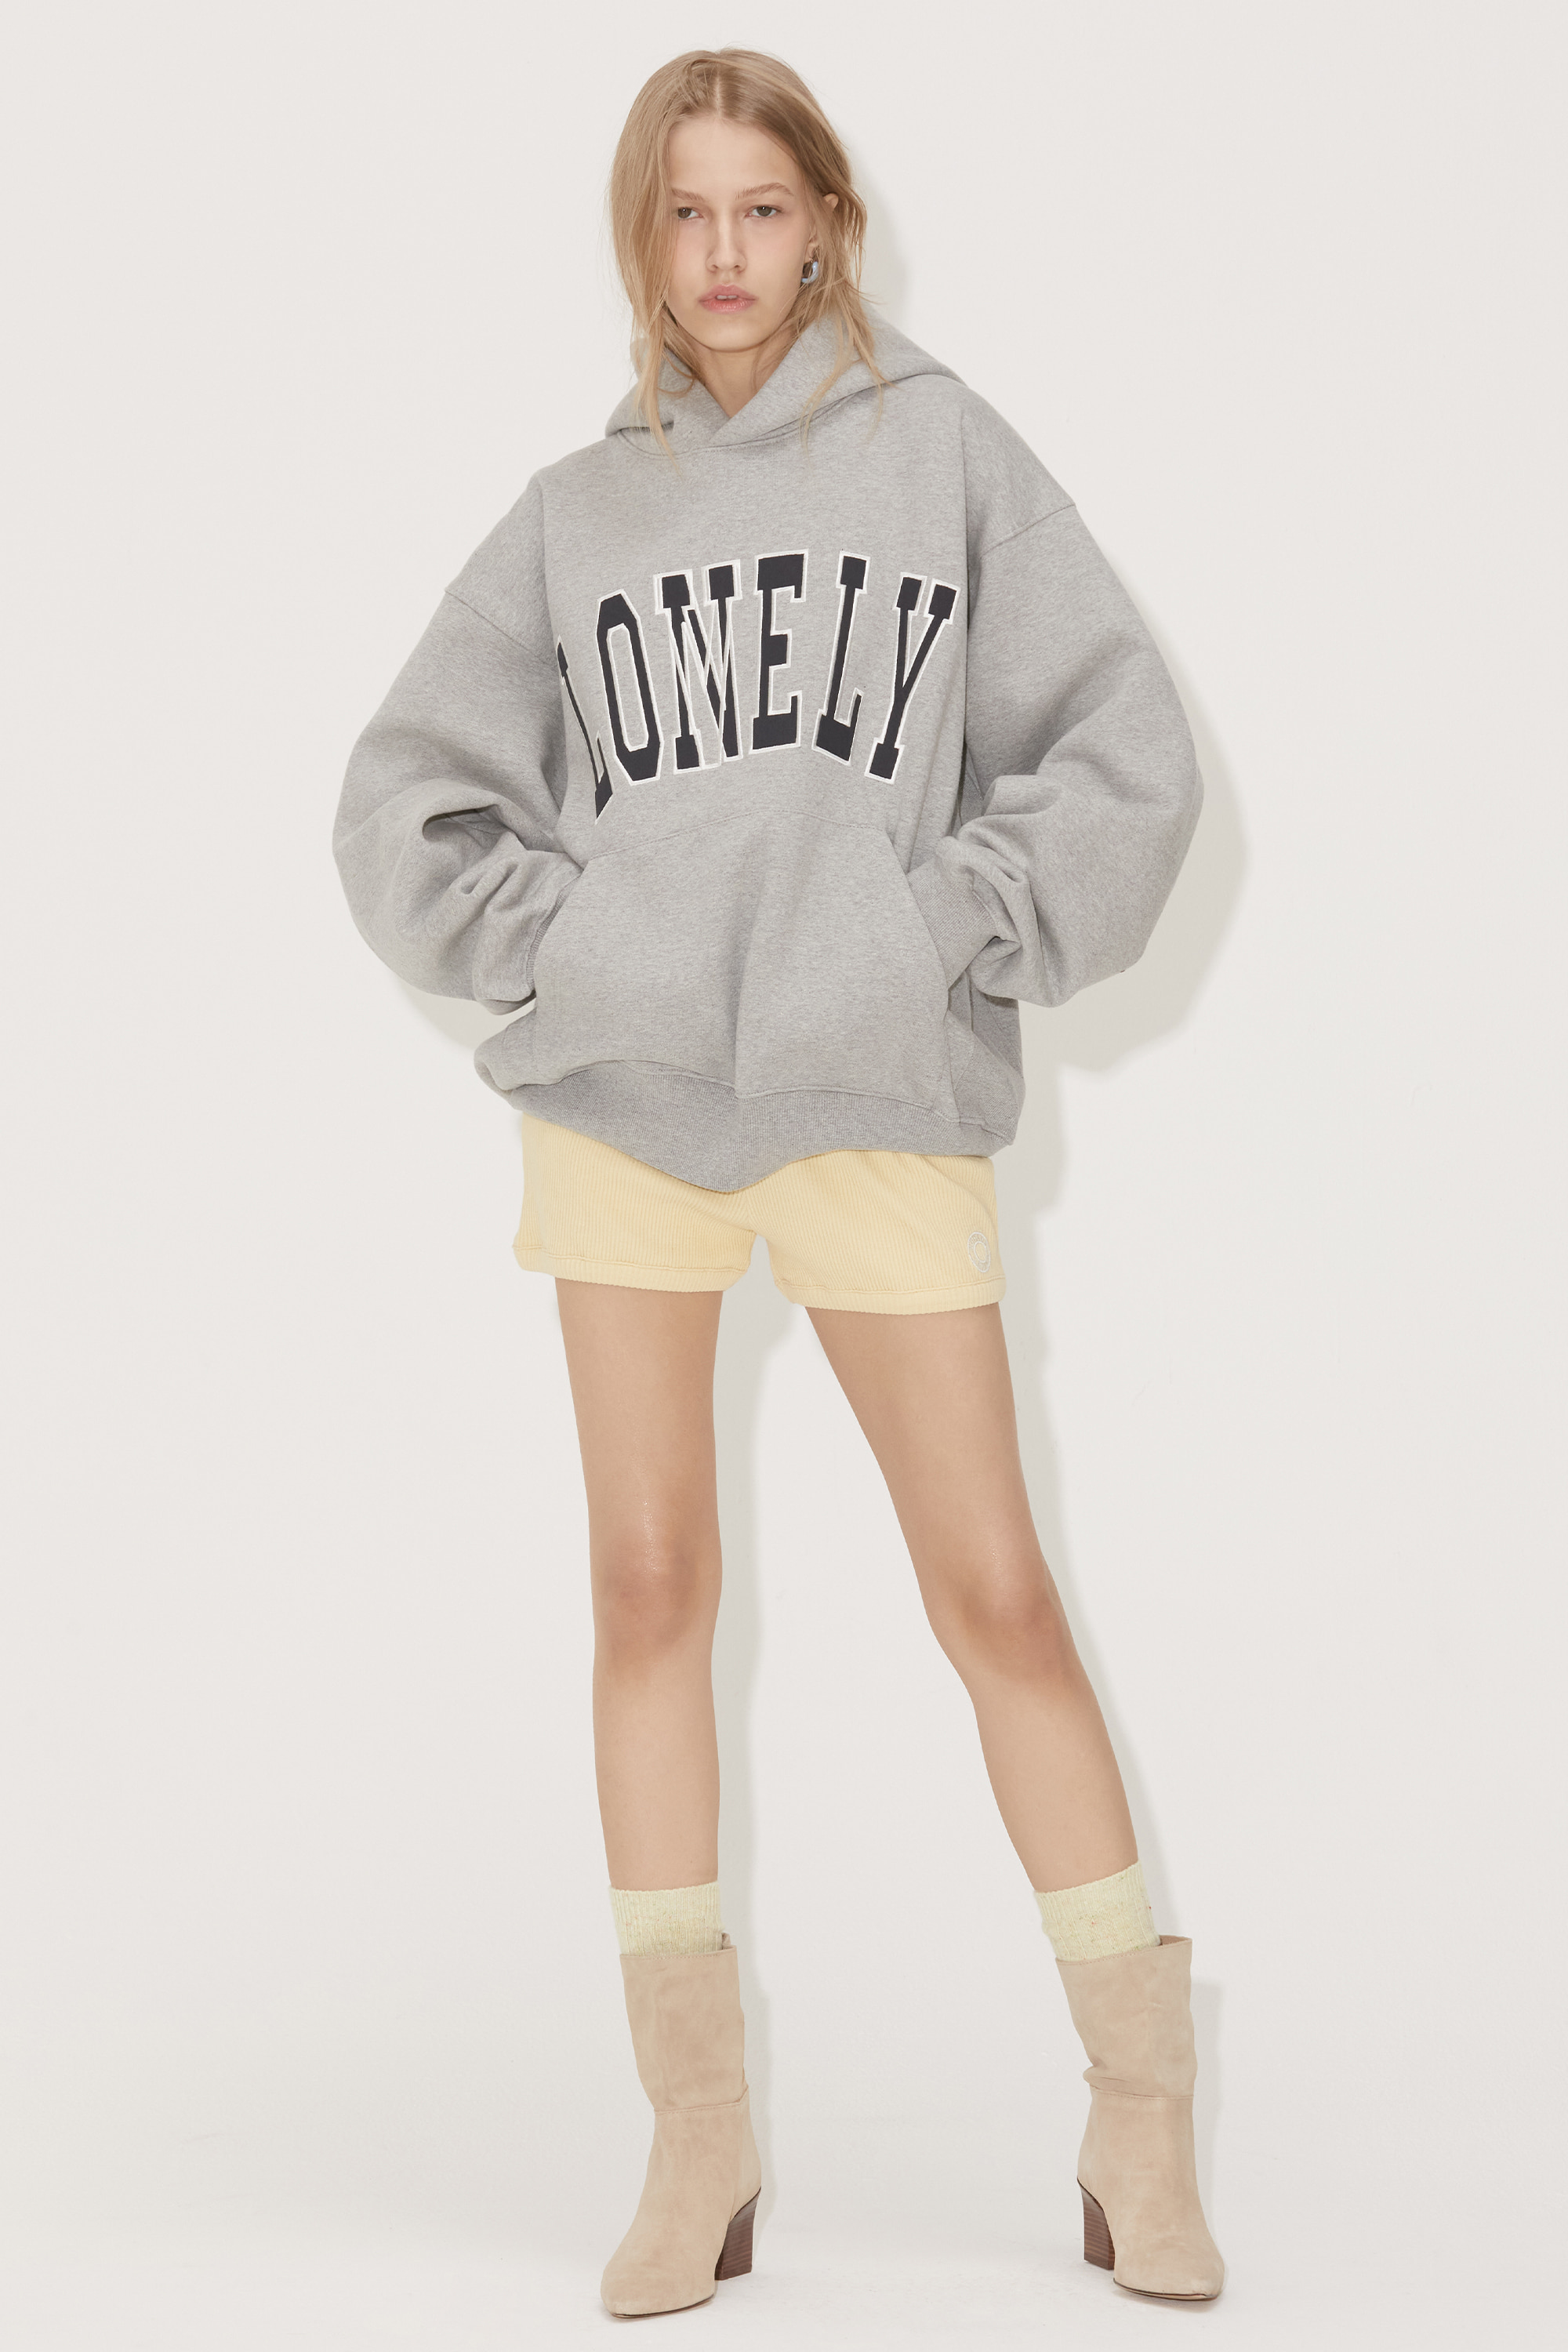 LONELY/LOVELY FLUFF HOODIE